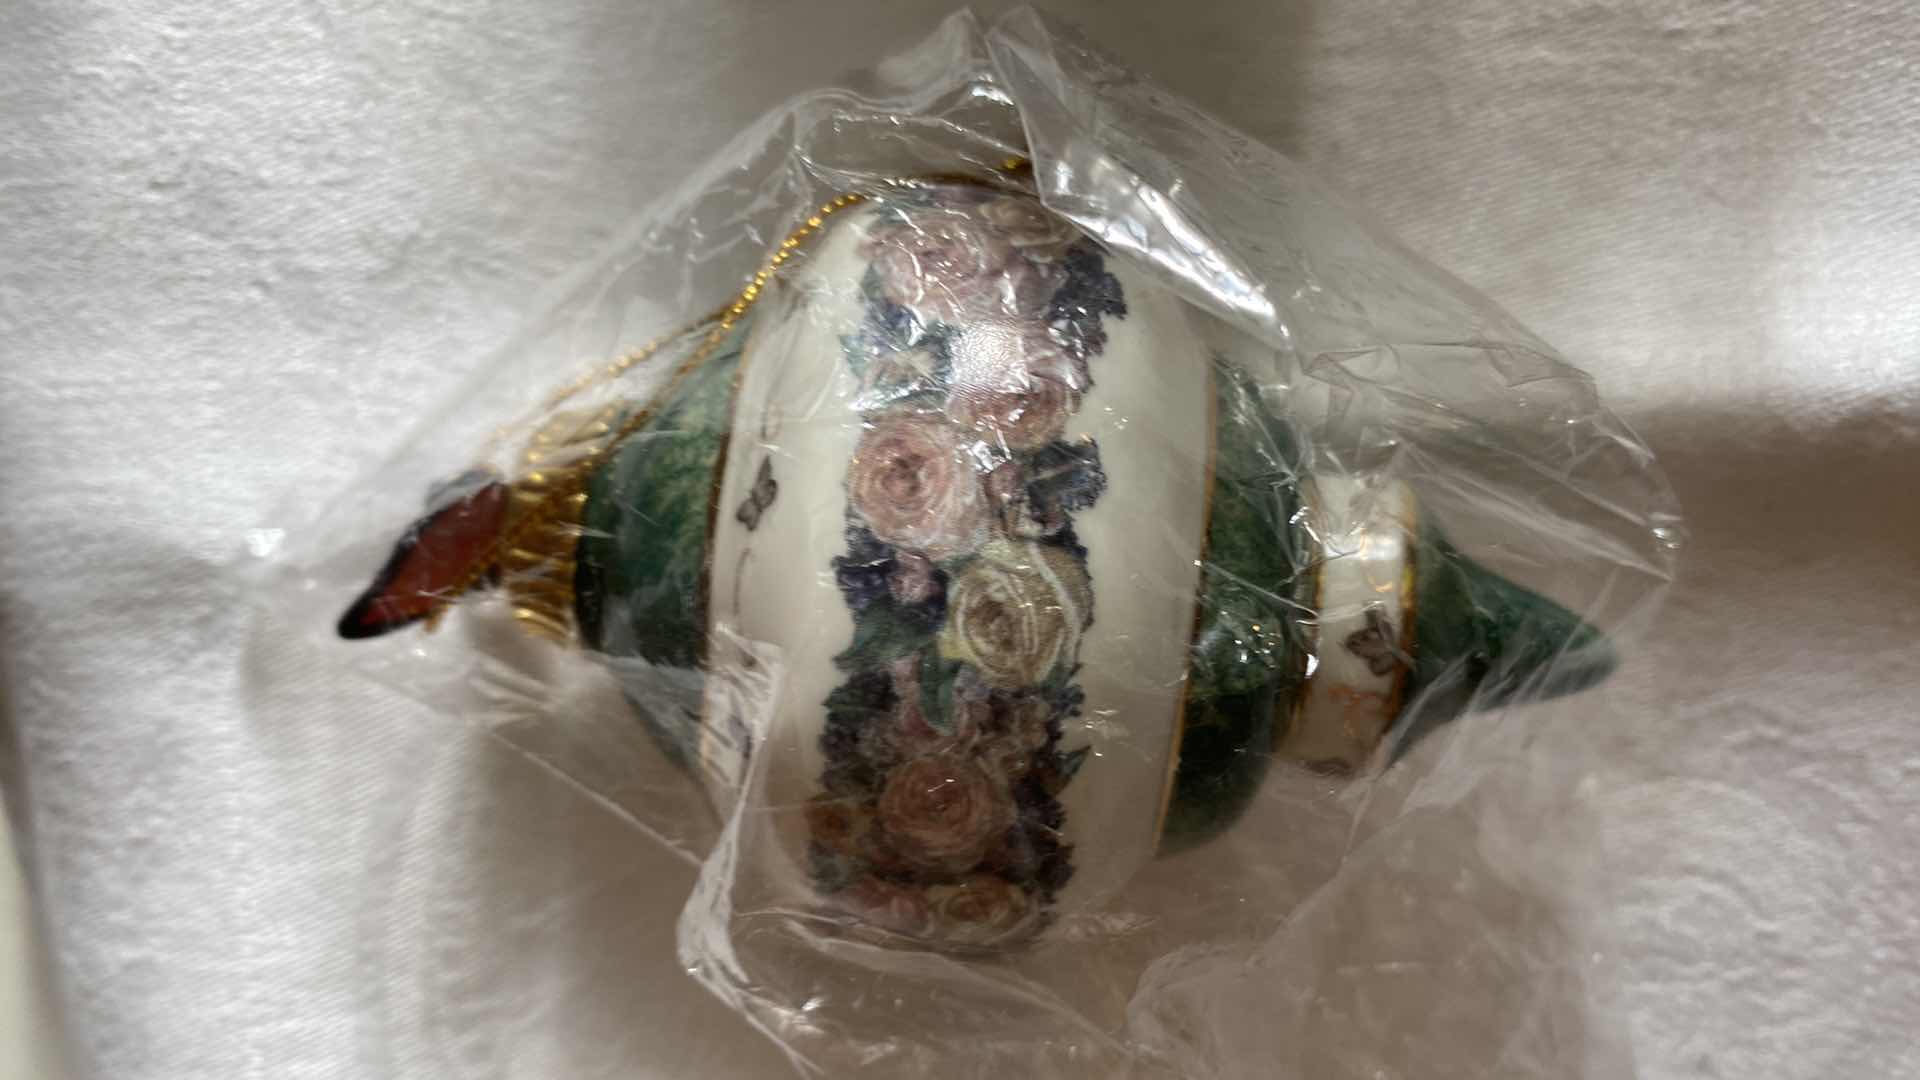 Photo 5 of VINTAGE FOUR LENA LIU’s FLORAL INSPIRATIONS PORCELAIN ORNAMENTS COLLECTIBLES BY BRADFORD EXCHANGE WITH 2 CERTIFICATE OF AUTHENTICITY (Pattern on certificate may not be correct)